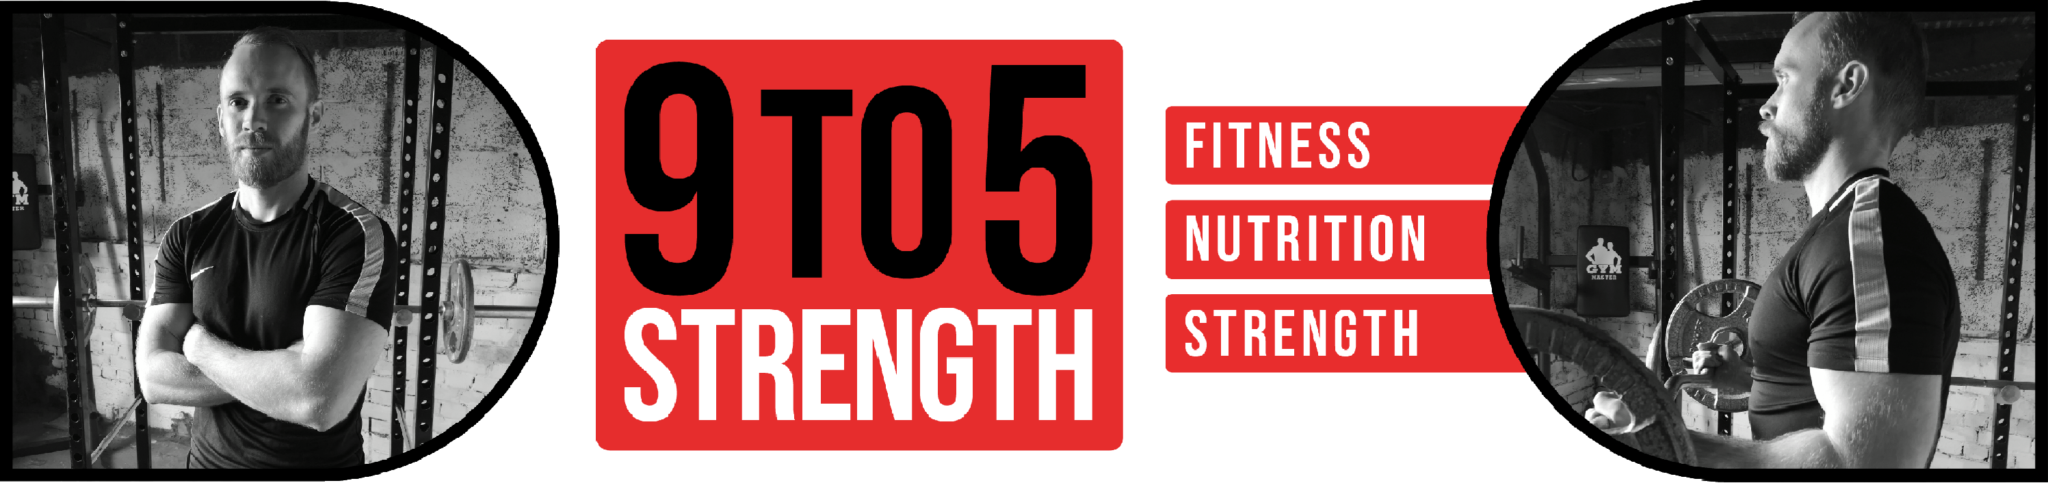 9to5strength